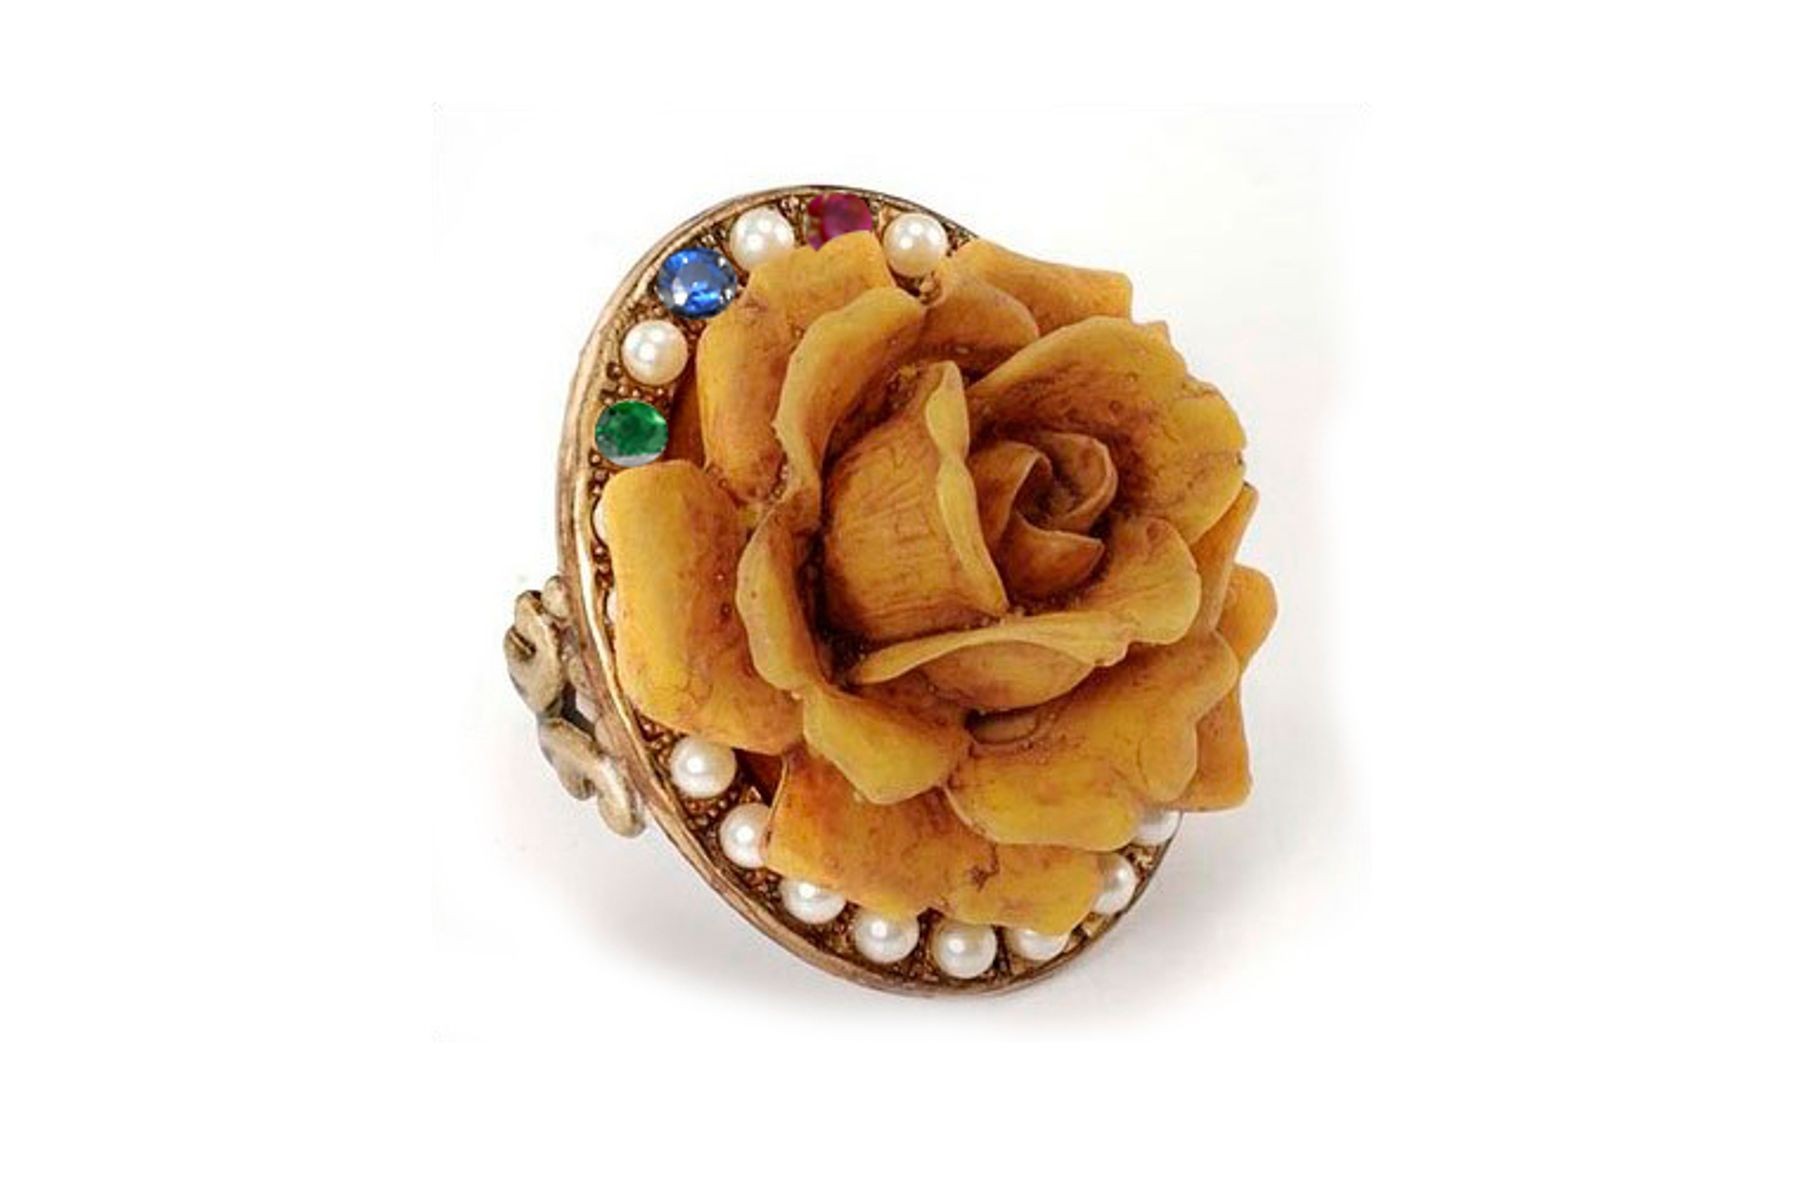 Frivolous & Whimsical Romantic Vintage Inspired Gold Pearl Ruby Emerald Sapphire Blooming Rose Flower Diamond Ring